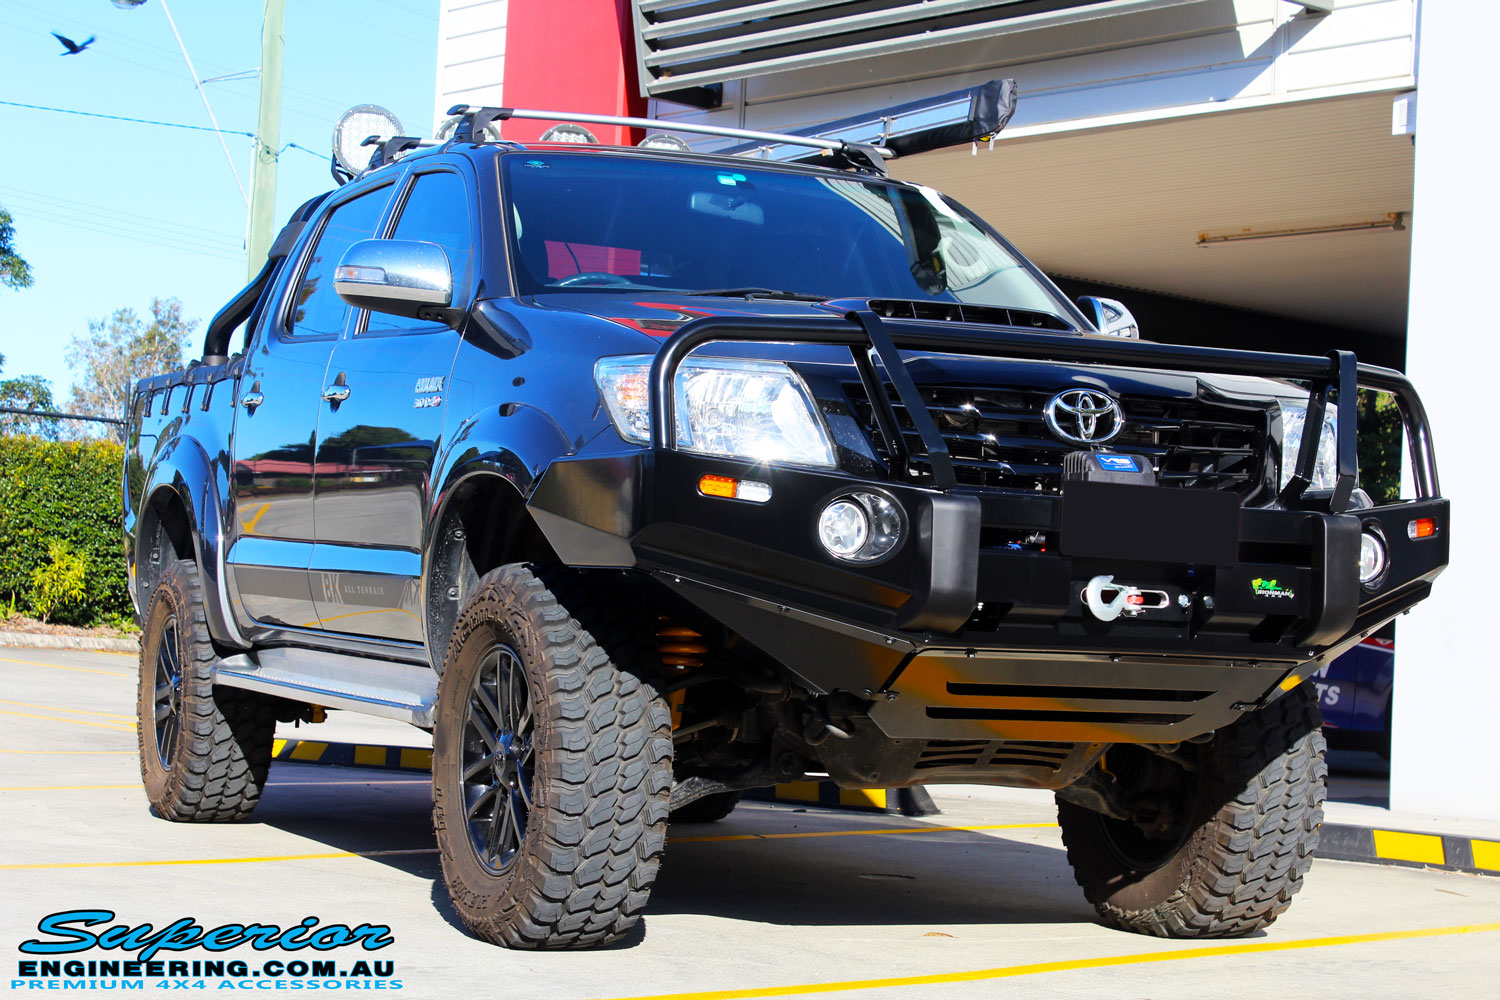 Right front side view of a Grey Toyota Vigo Hilux Dual Cab after fitment of a 2" Inch Lift Kit, VRS Winch & Ironman 4x4 Bullbar